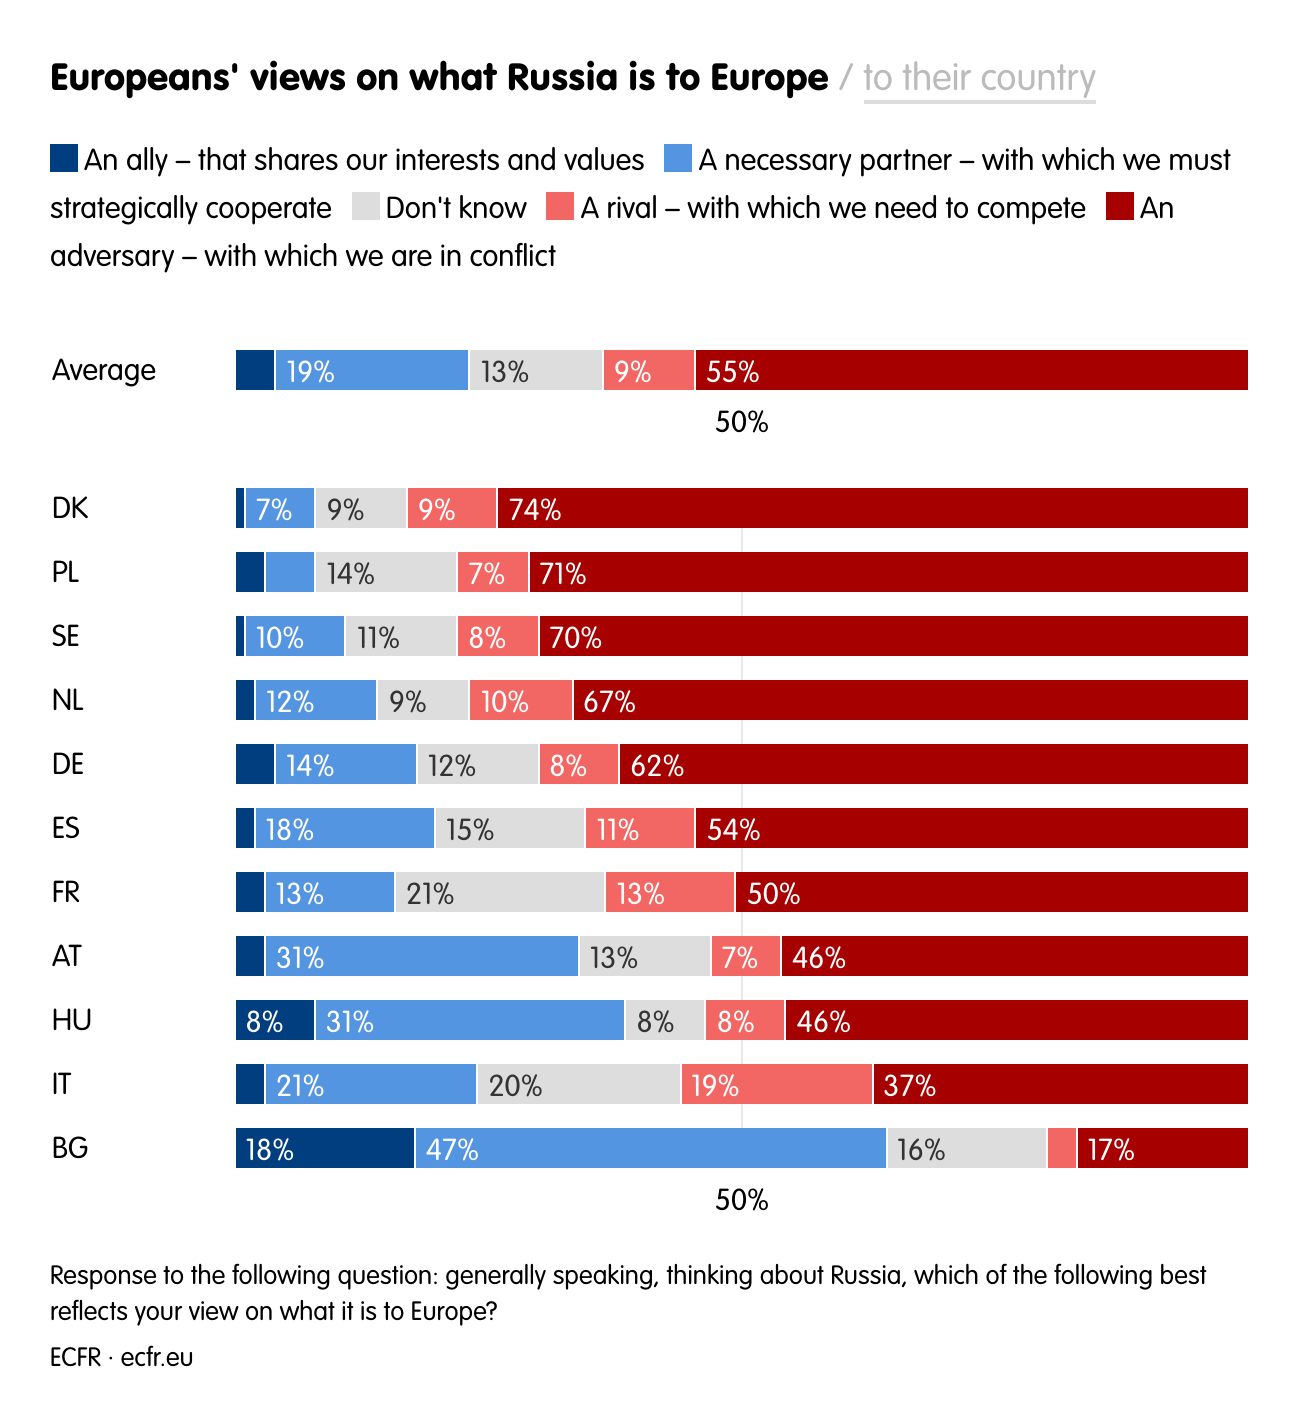 Europeans' views on what Russia is to Europe